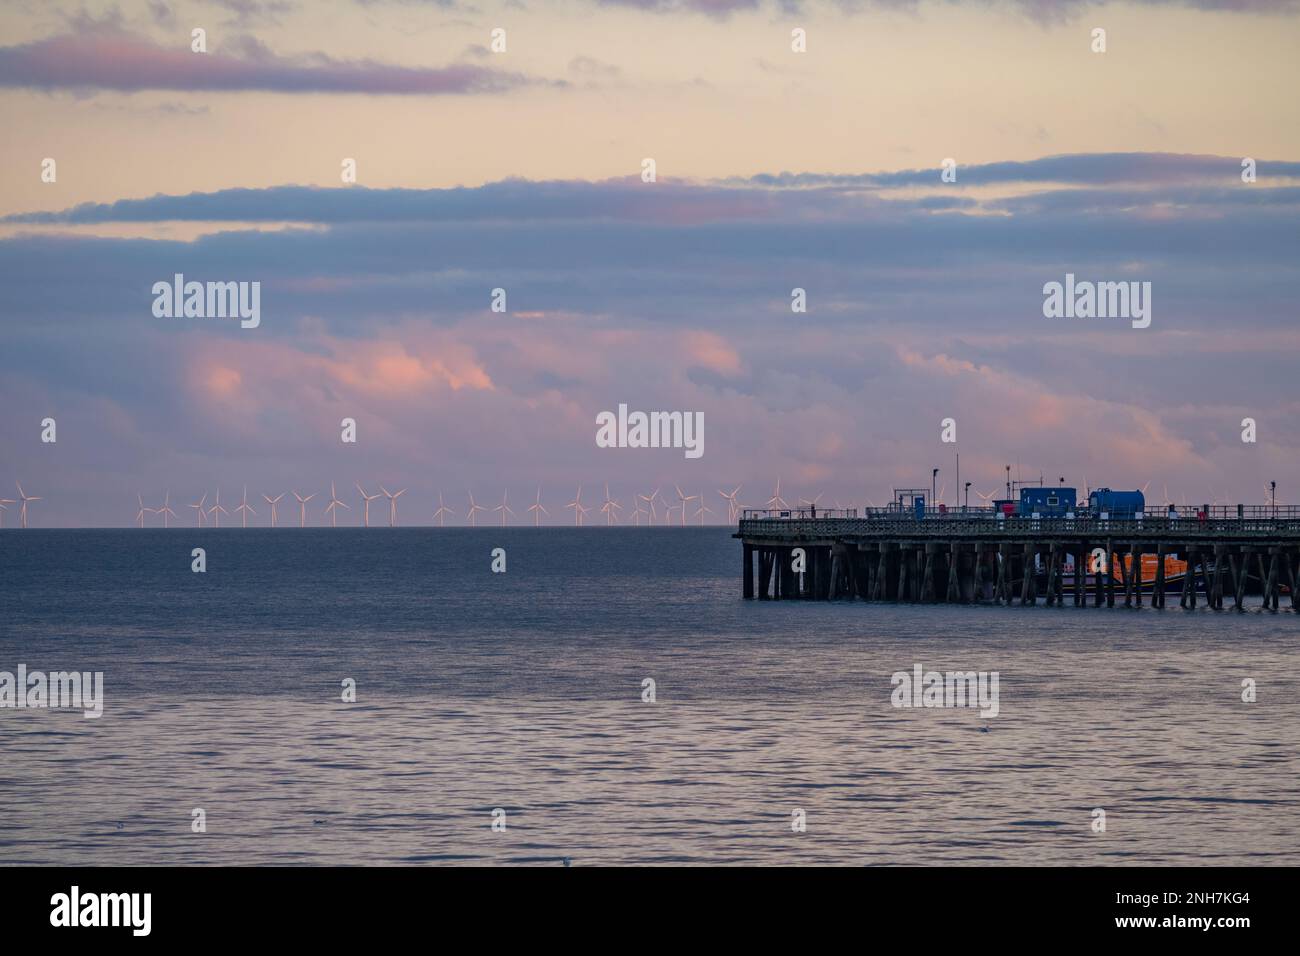 The pier at Walton on the Naze with windsurf in the distance. Stock Photo